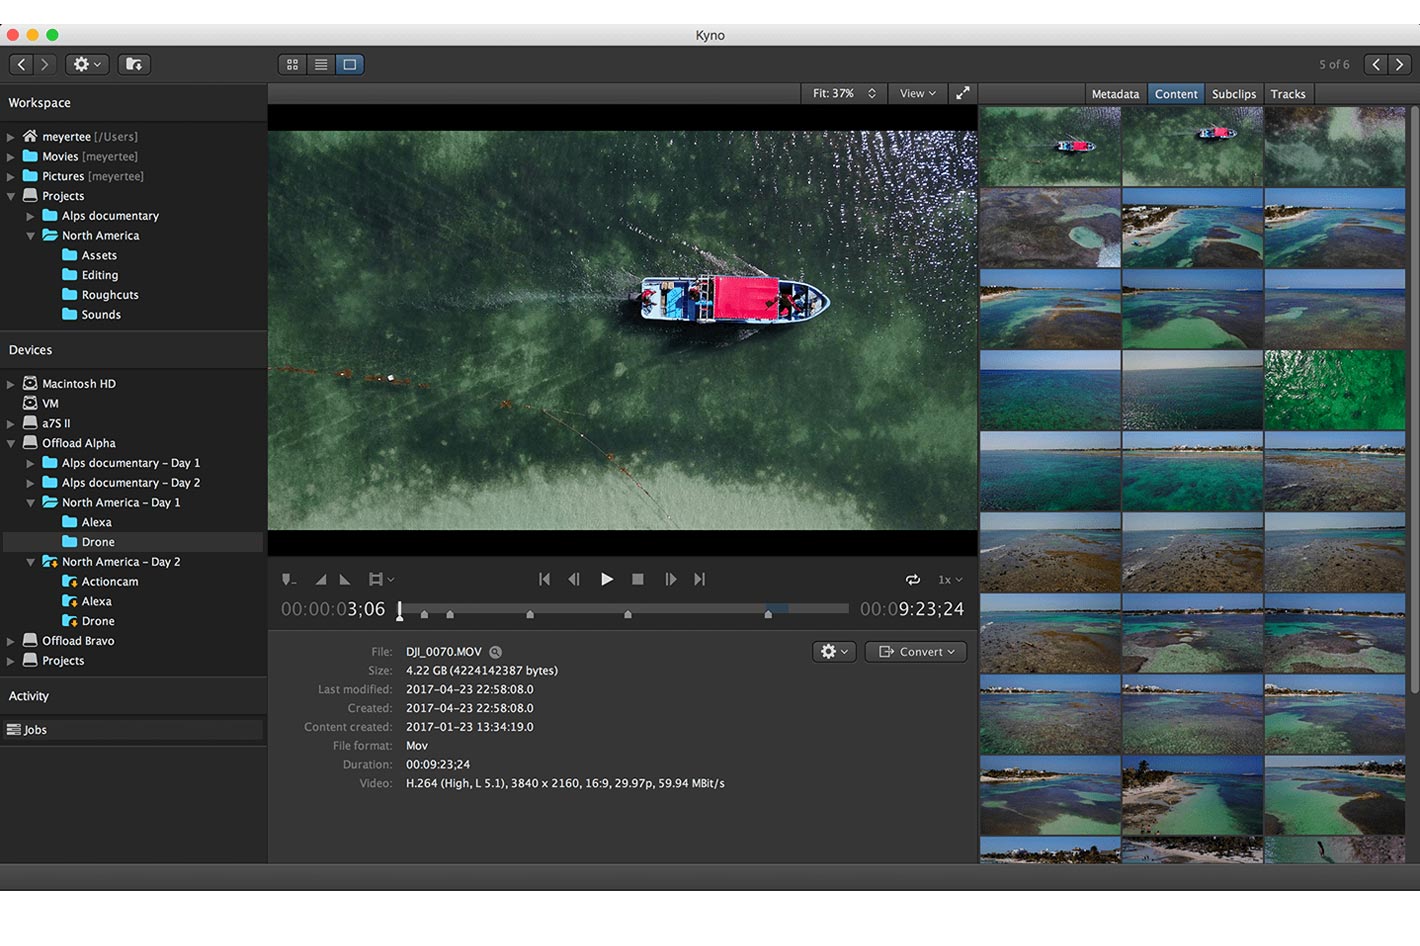 Kyno 1.8: now with DaVinci Resolve and Avid Media Composer integration